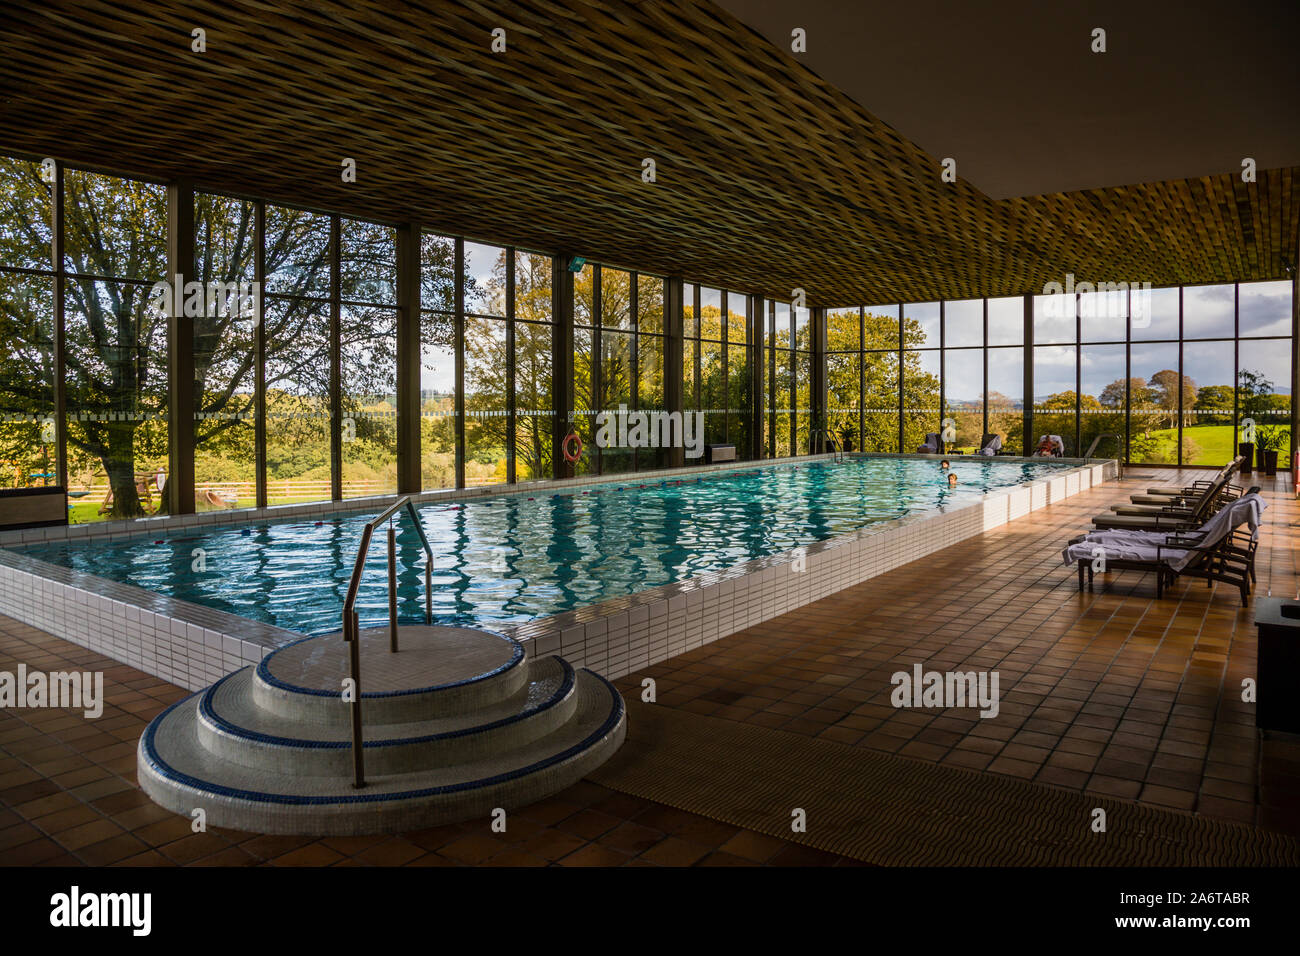 The Dunloe Hotel near Killarney, Ireland. Indoor swimming pool with a view of the countryside Stock Photo